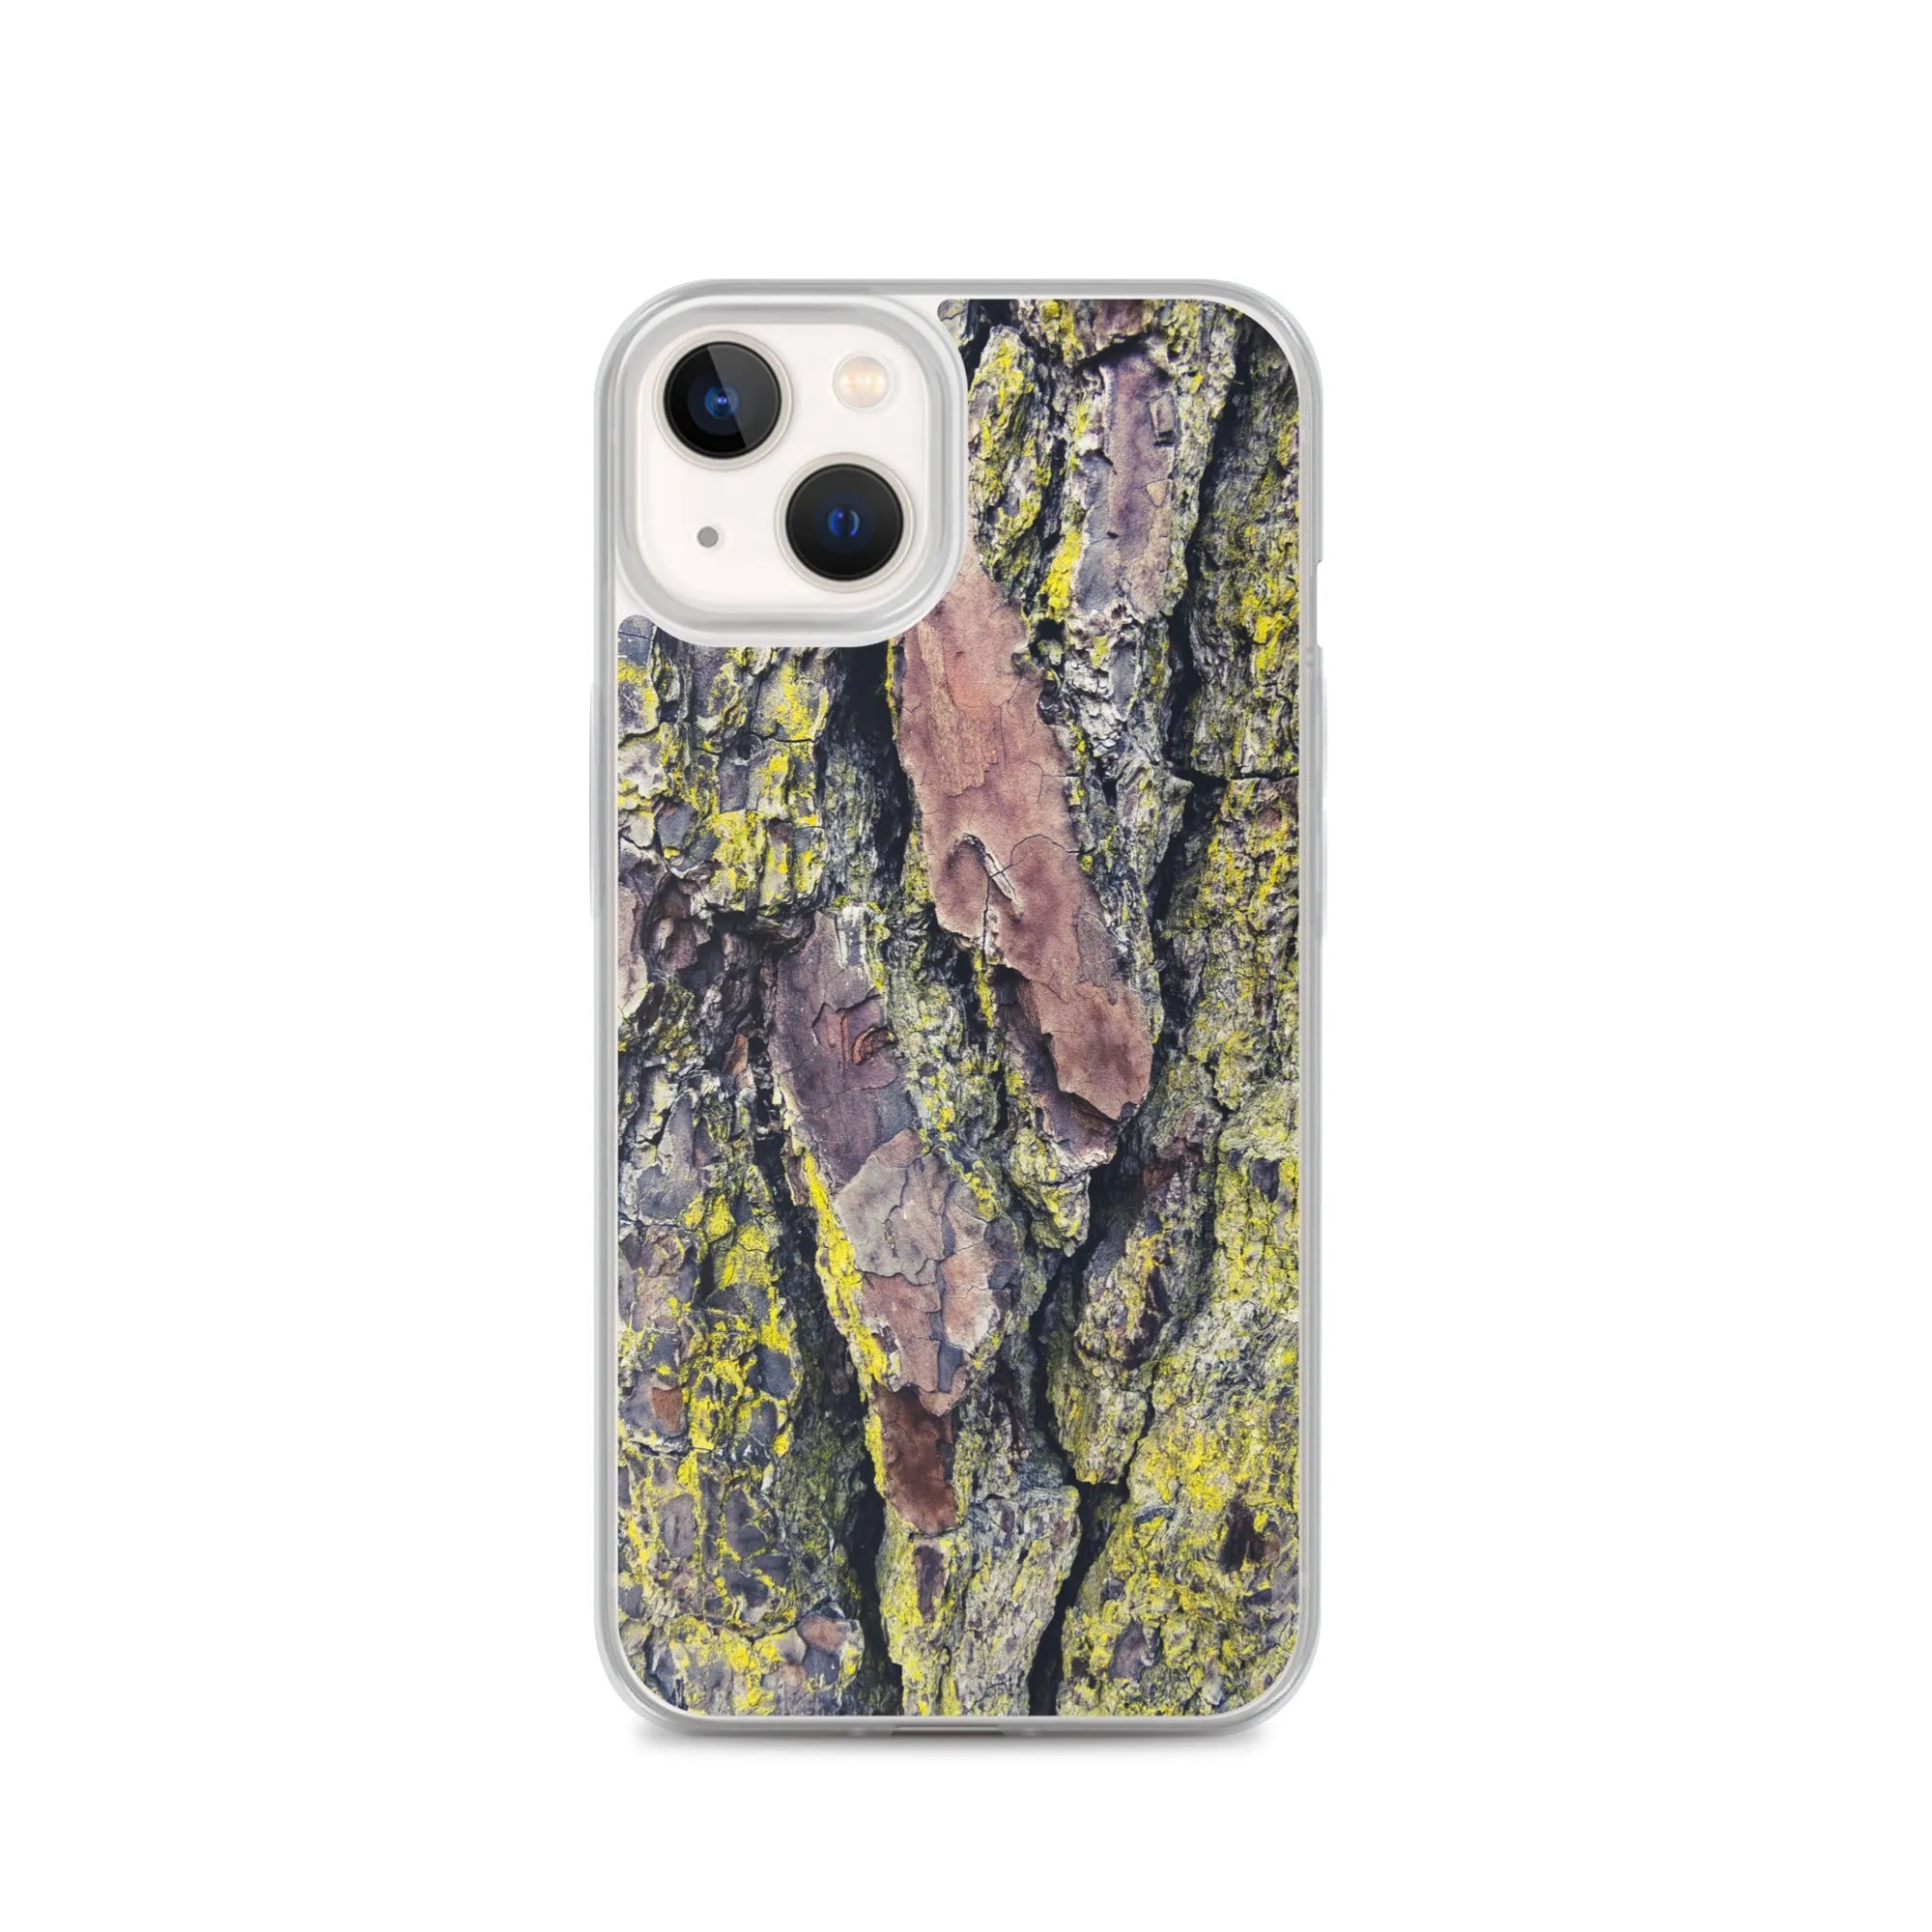 Barking Mad 2 + Too - Botanical Art Pattern Iphone Case - Iphone 13 - Mobile Phone Cases - Aesthetic Art